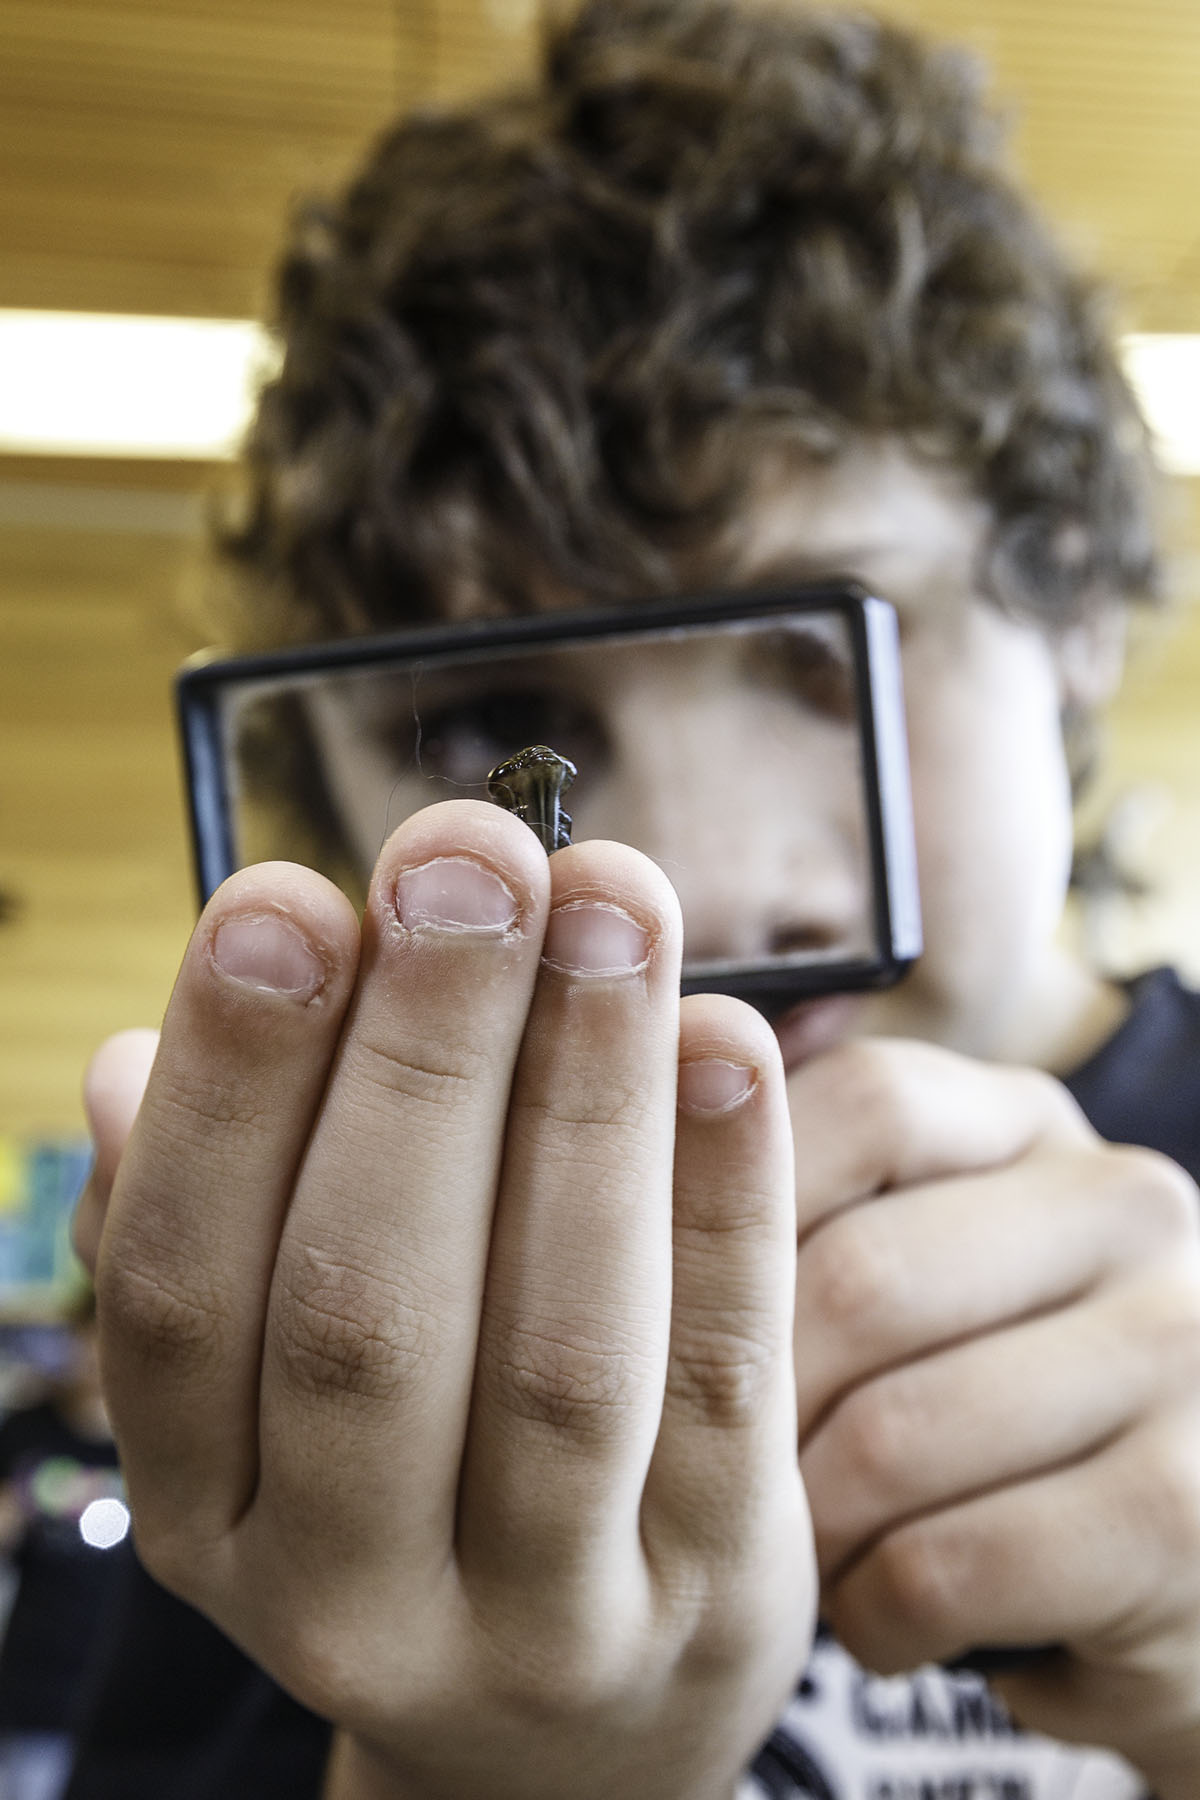 A young person examines a specimen with a large magnifying glass